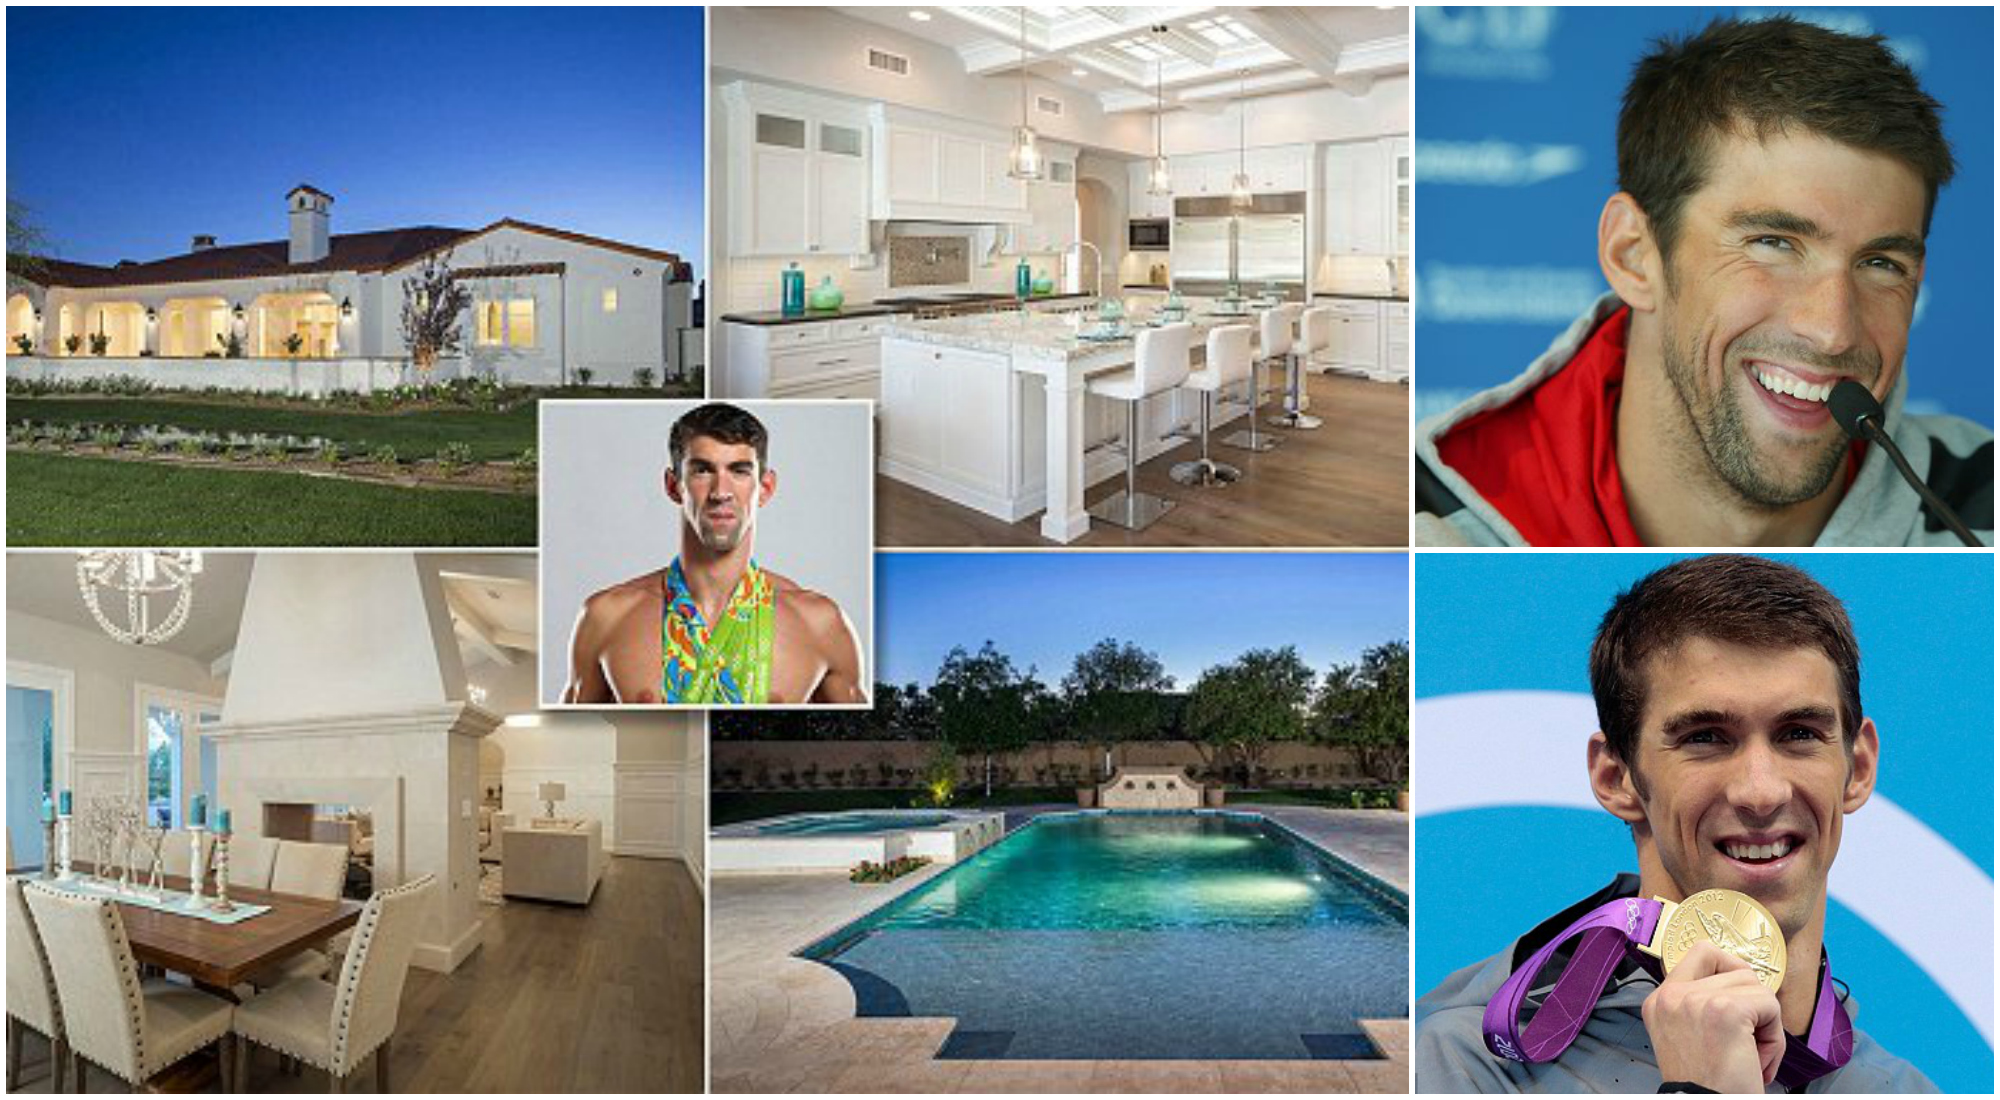 How Much is Michael Phelps’ Net Worth?